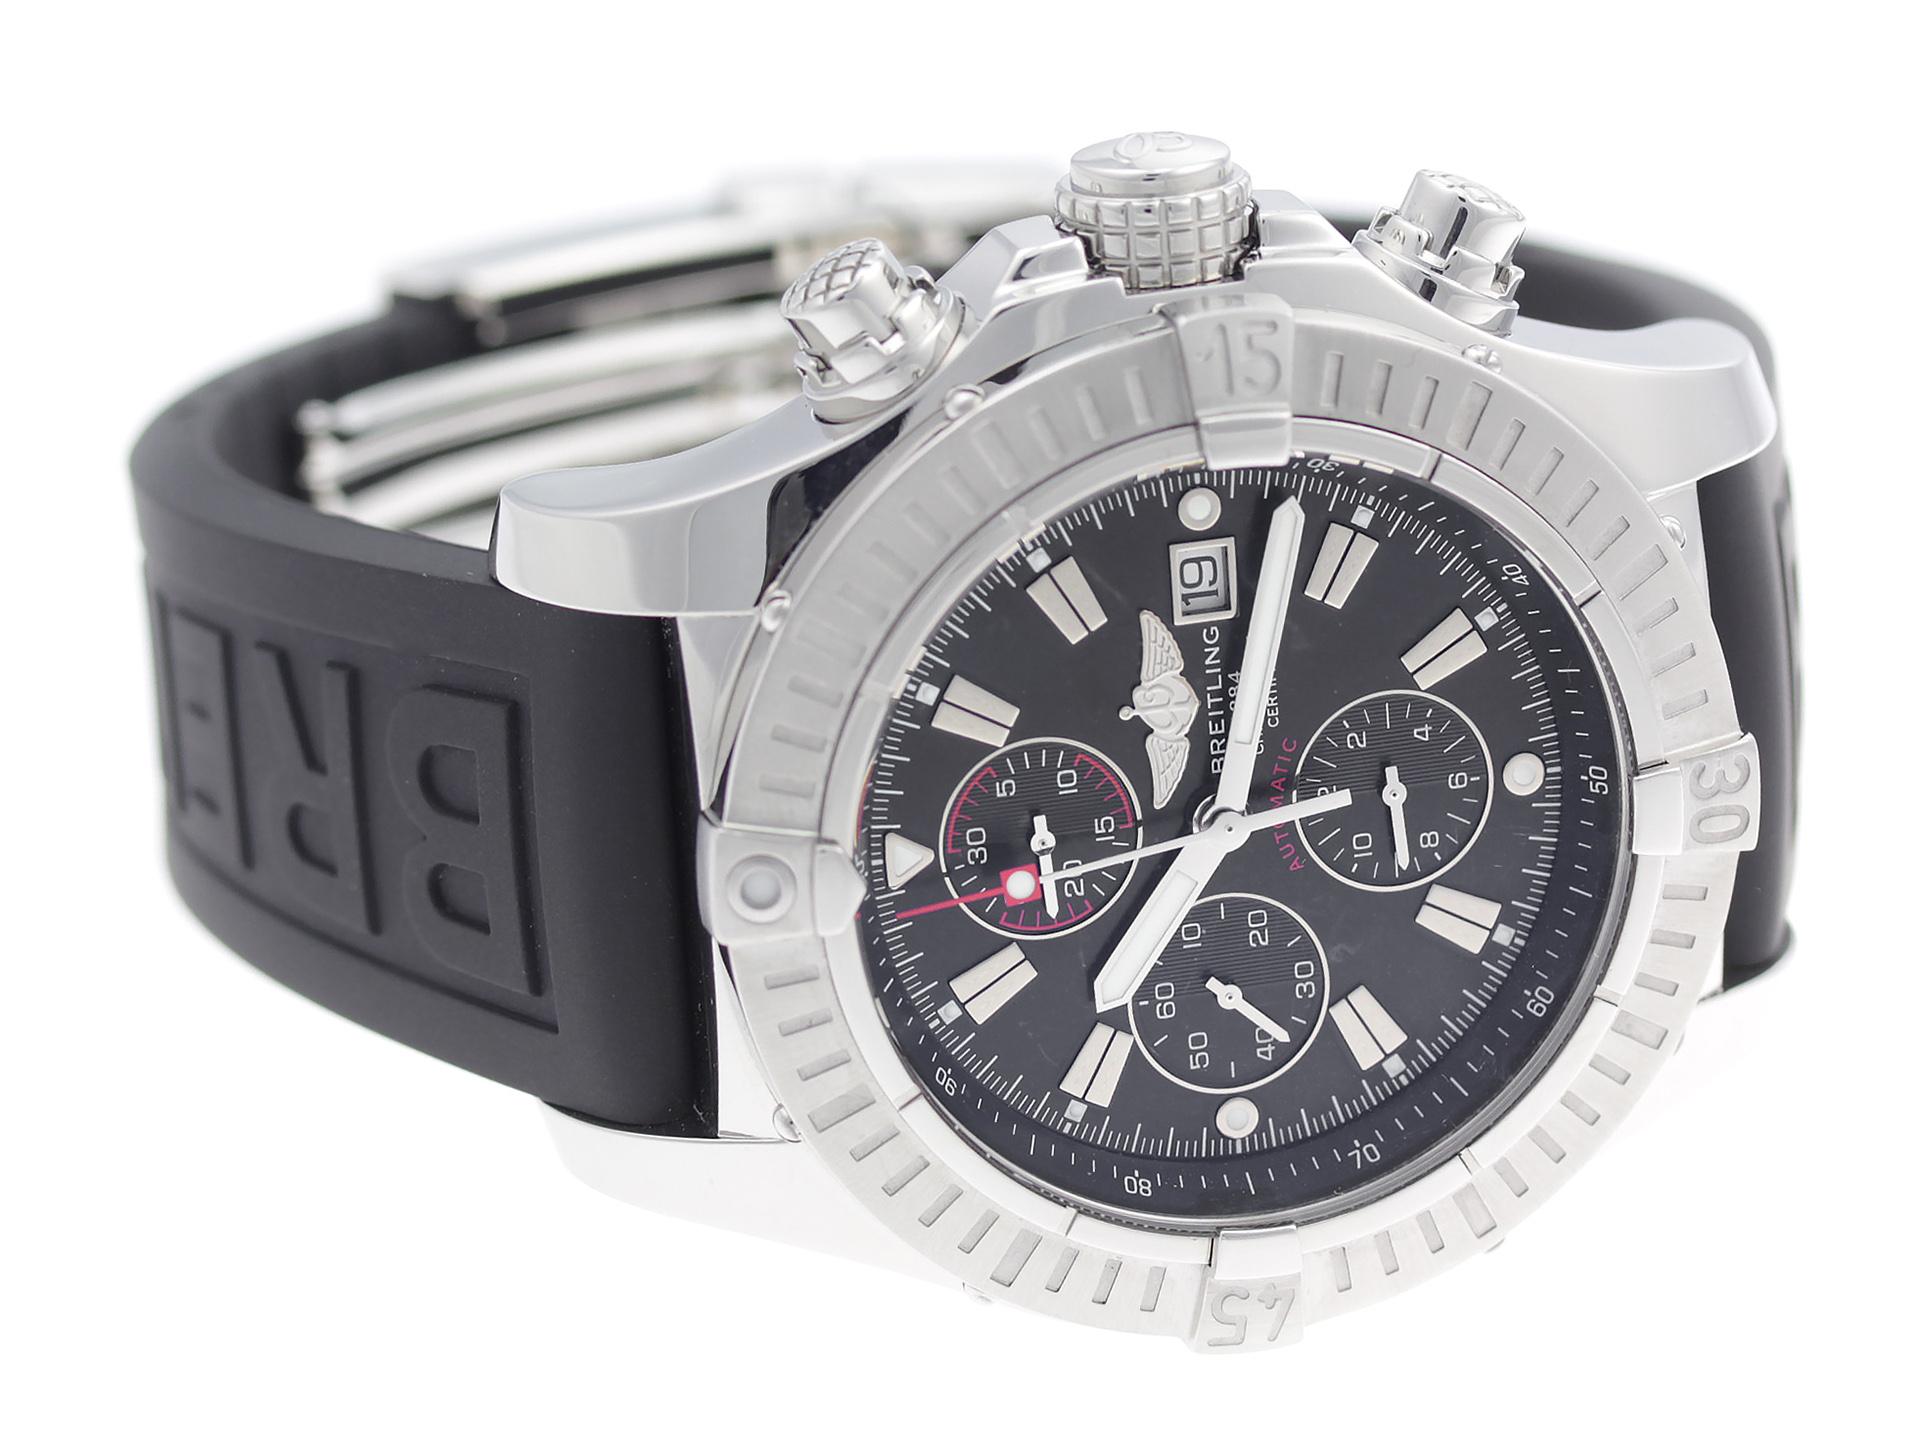 Stainless steel Breitling Aeromarine Super Avenger automatic watch with a 48.6mm case, black dial, and Diver Pro III rubber strap with folding buckle. Features include hours, minutes, seconds, date, and chronograph. Comes with Deluxe Gift Box and 2